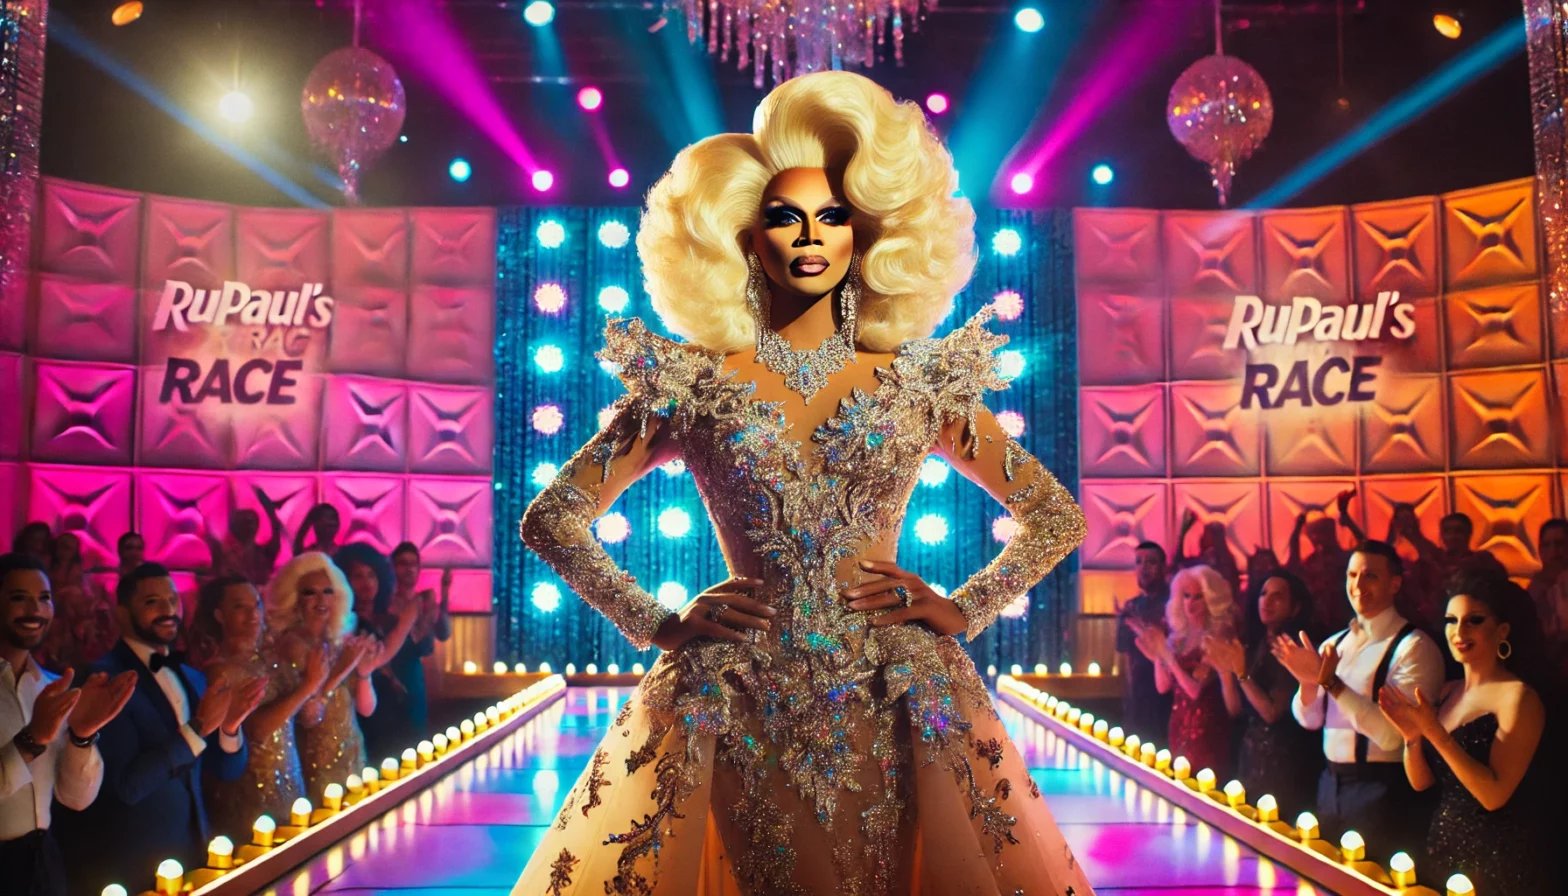 A stunning and glamorous RuPaul, the iconic drag queen and diva of reality TV hosting, stands confidently on a vibrant stage. RuPaul is dressed in an extravagant, sparkling gown with intricate details, a voluminous blonde wig, and flawless makeup. The background features colorful lights, a cheering audience, and a large banner that reads 'RuPaul's Drag Race,' capturing RuPaul's commanding presence and elegance as a host.